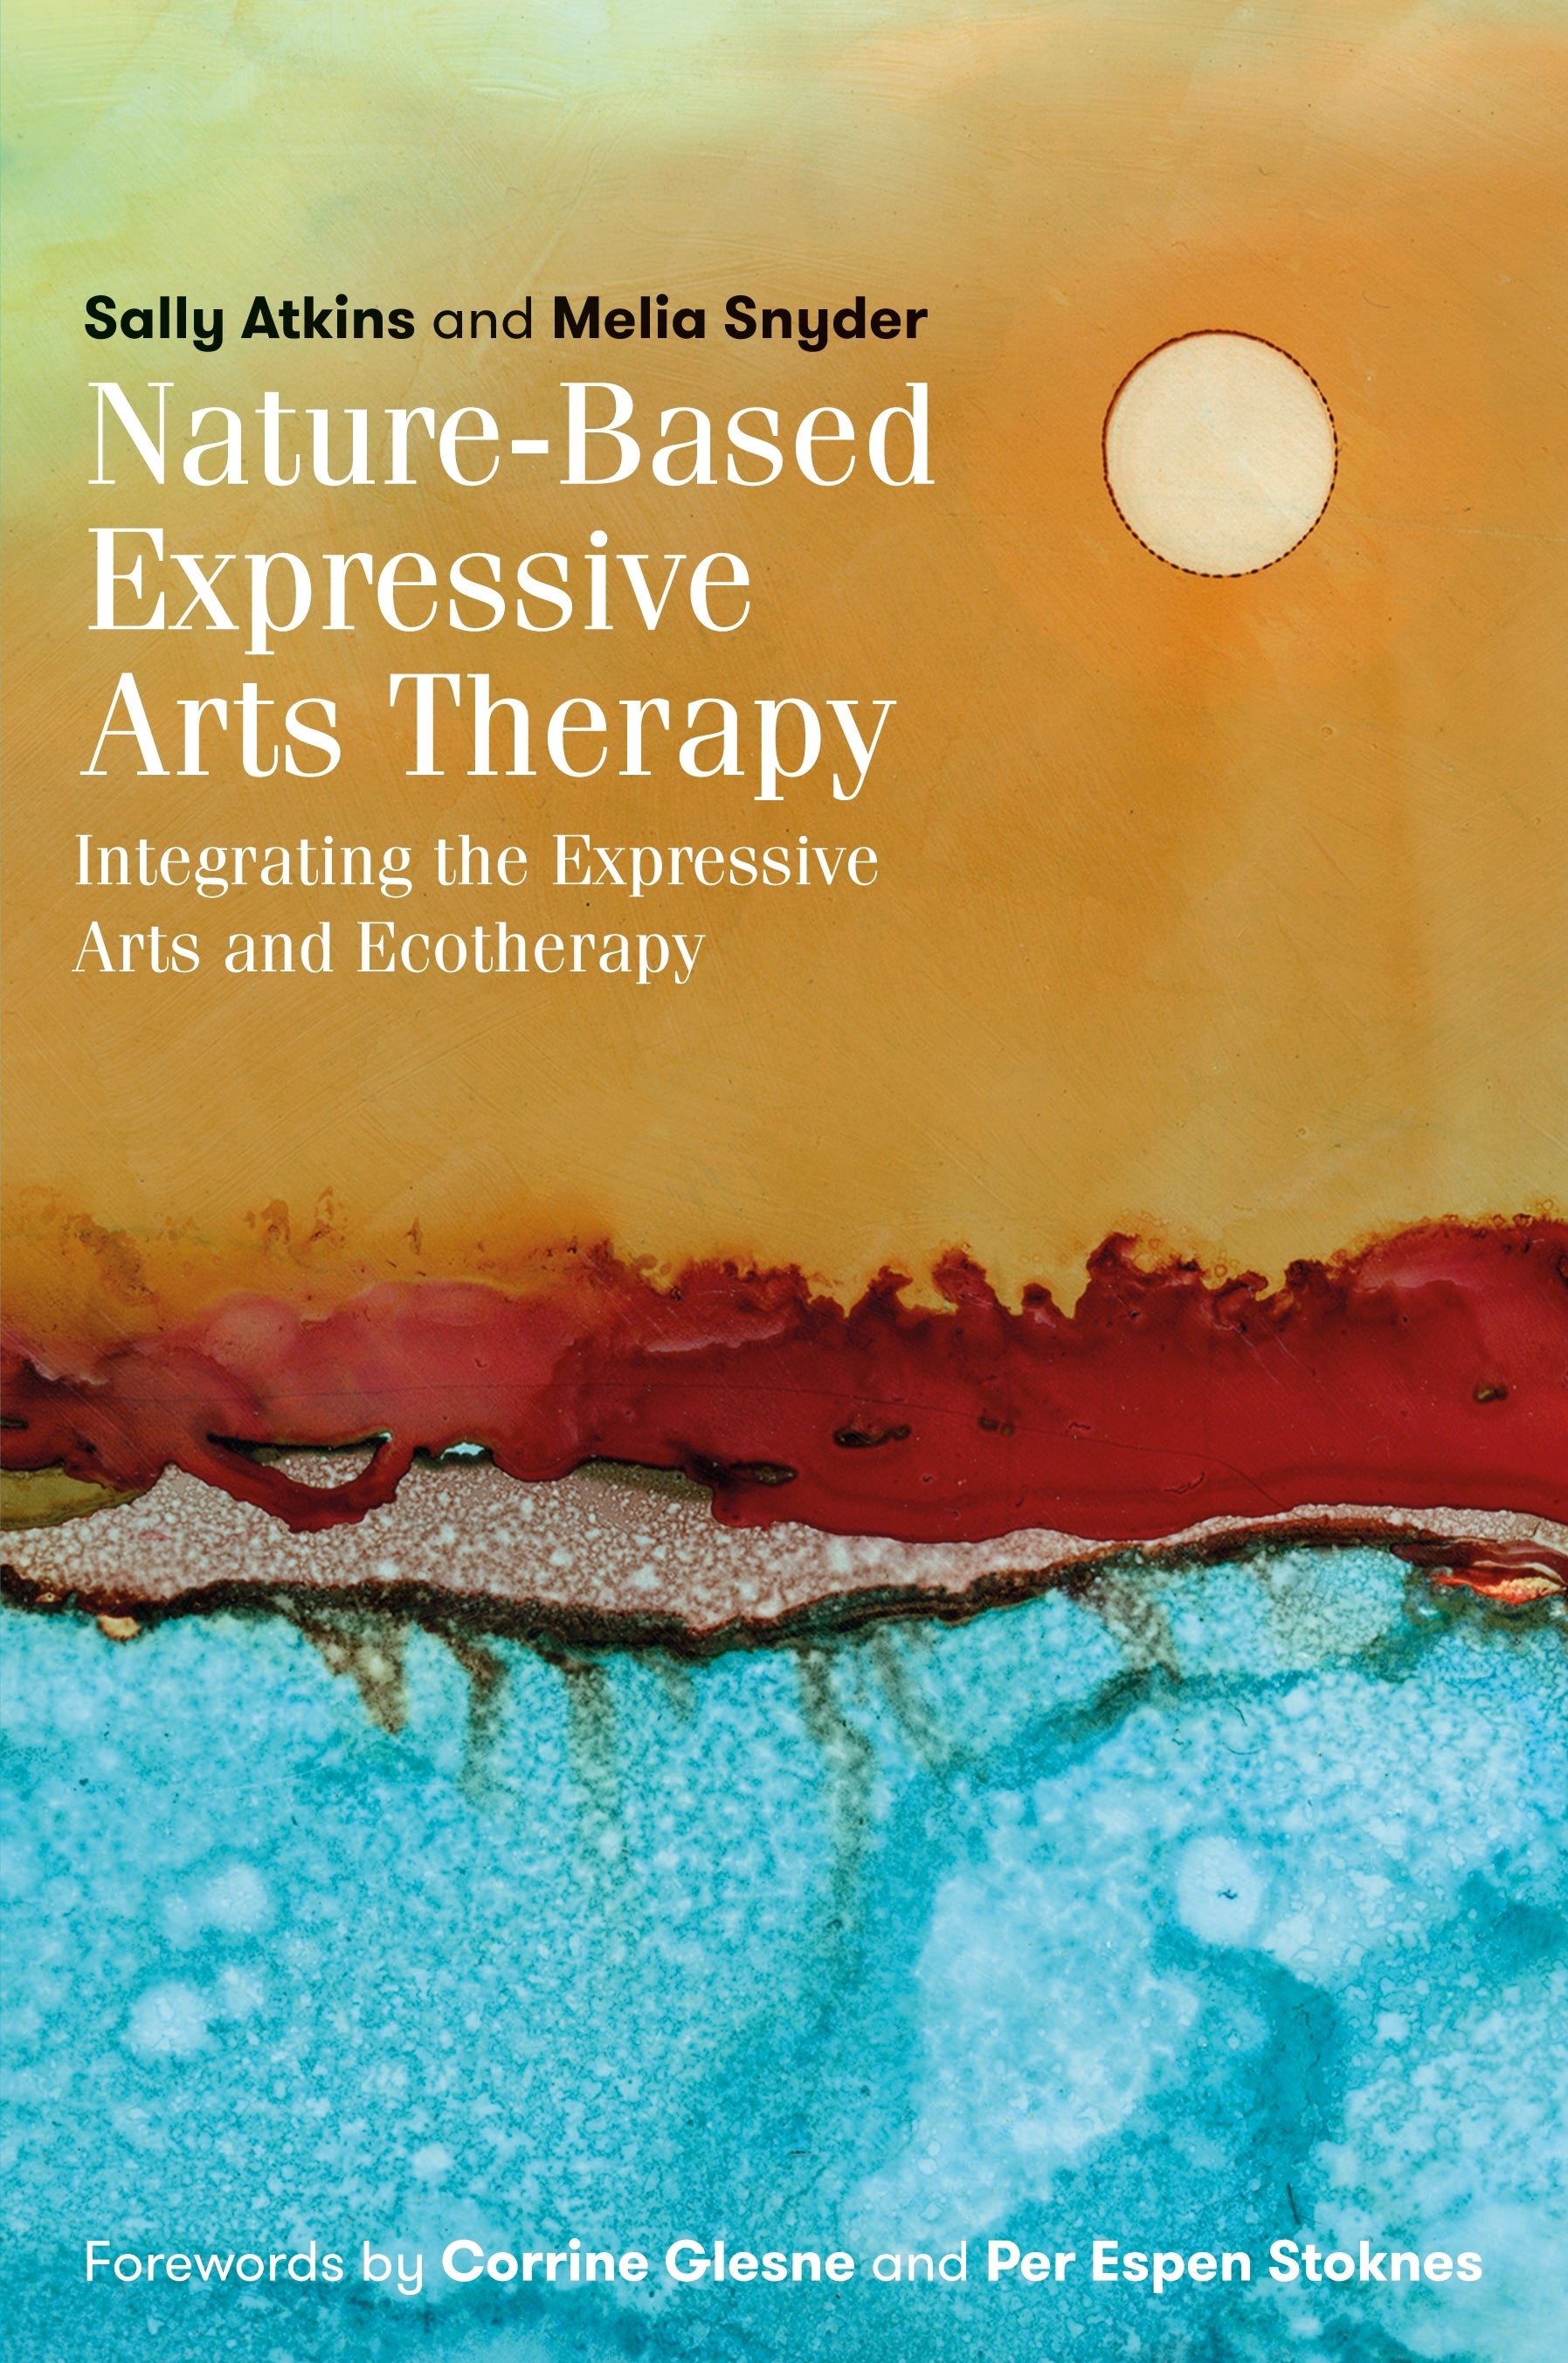 Nature-Based Expressive Arts Therapy by Sally Atkins, Melia Snyder, Corrine Glesne, Per Espen Stoknes